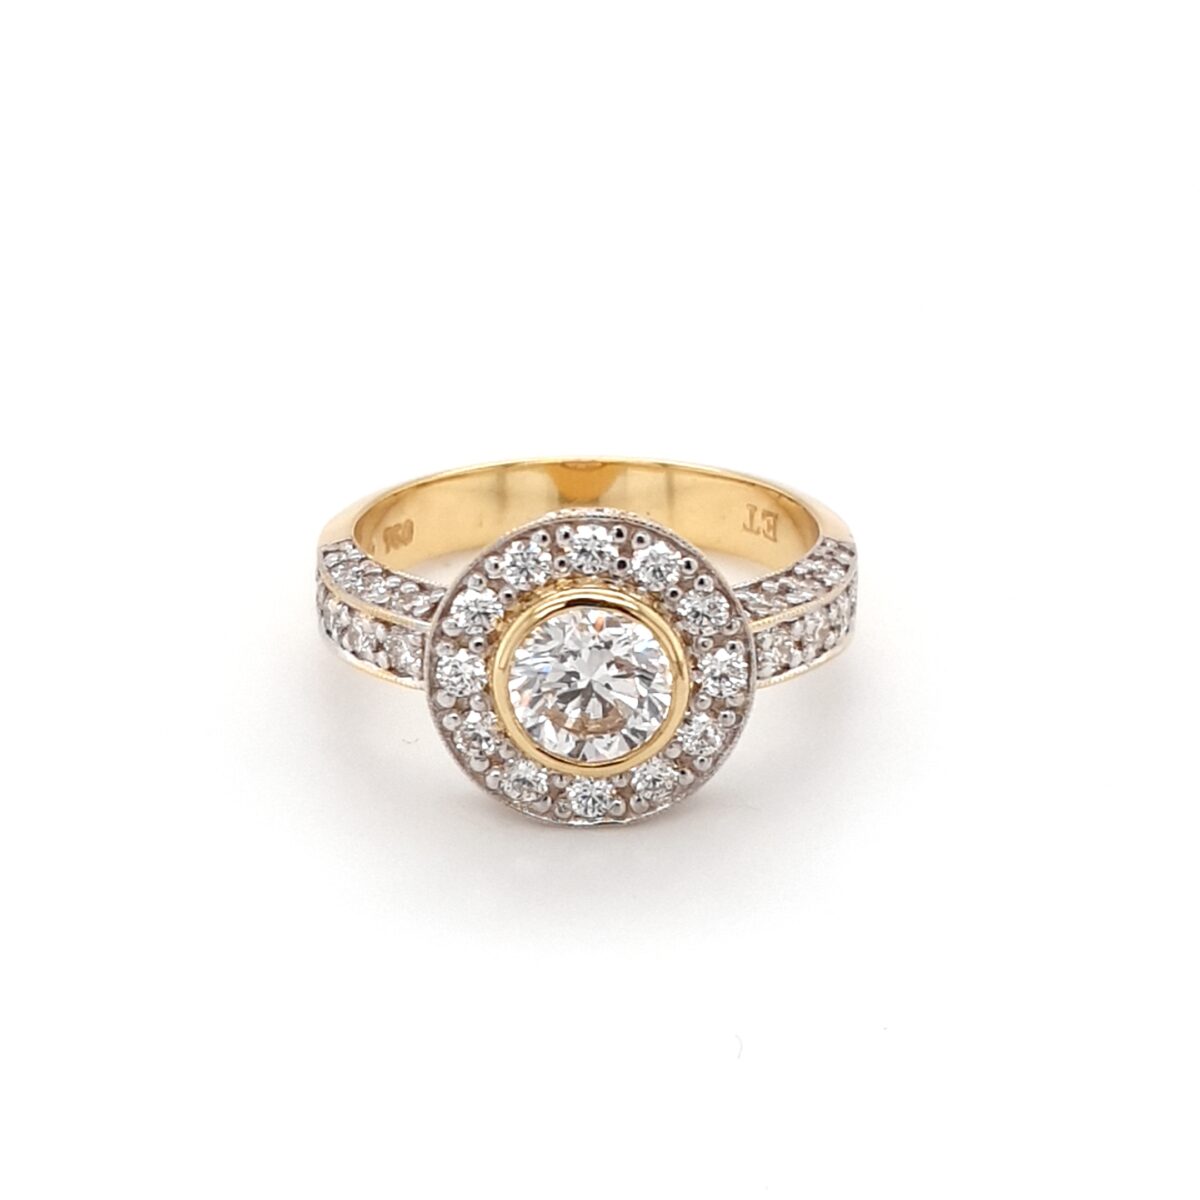 Leon Baker 18K Yellow Gold and Diamond Engagement Ring - Jewellery Store